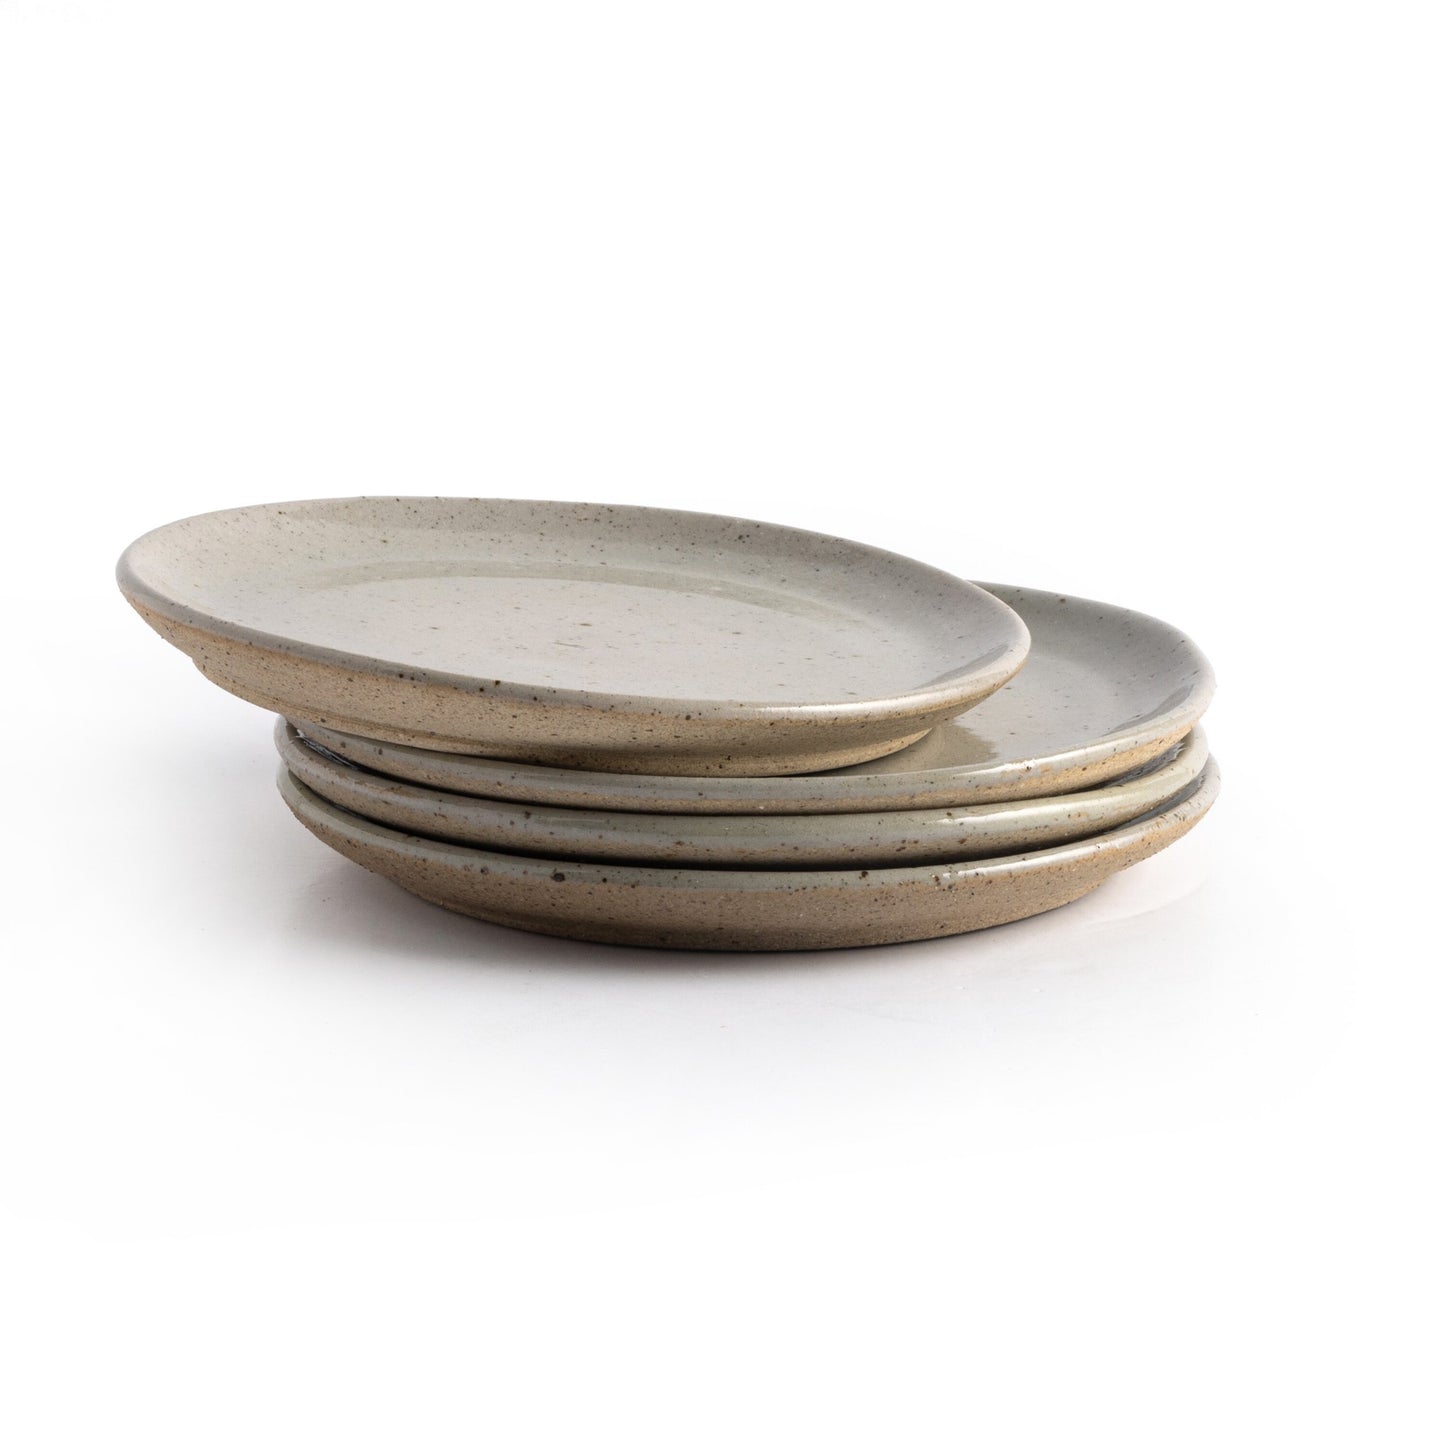 Nelo salad plate, set of 4-natural clay